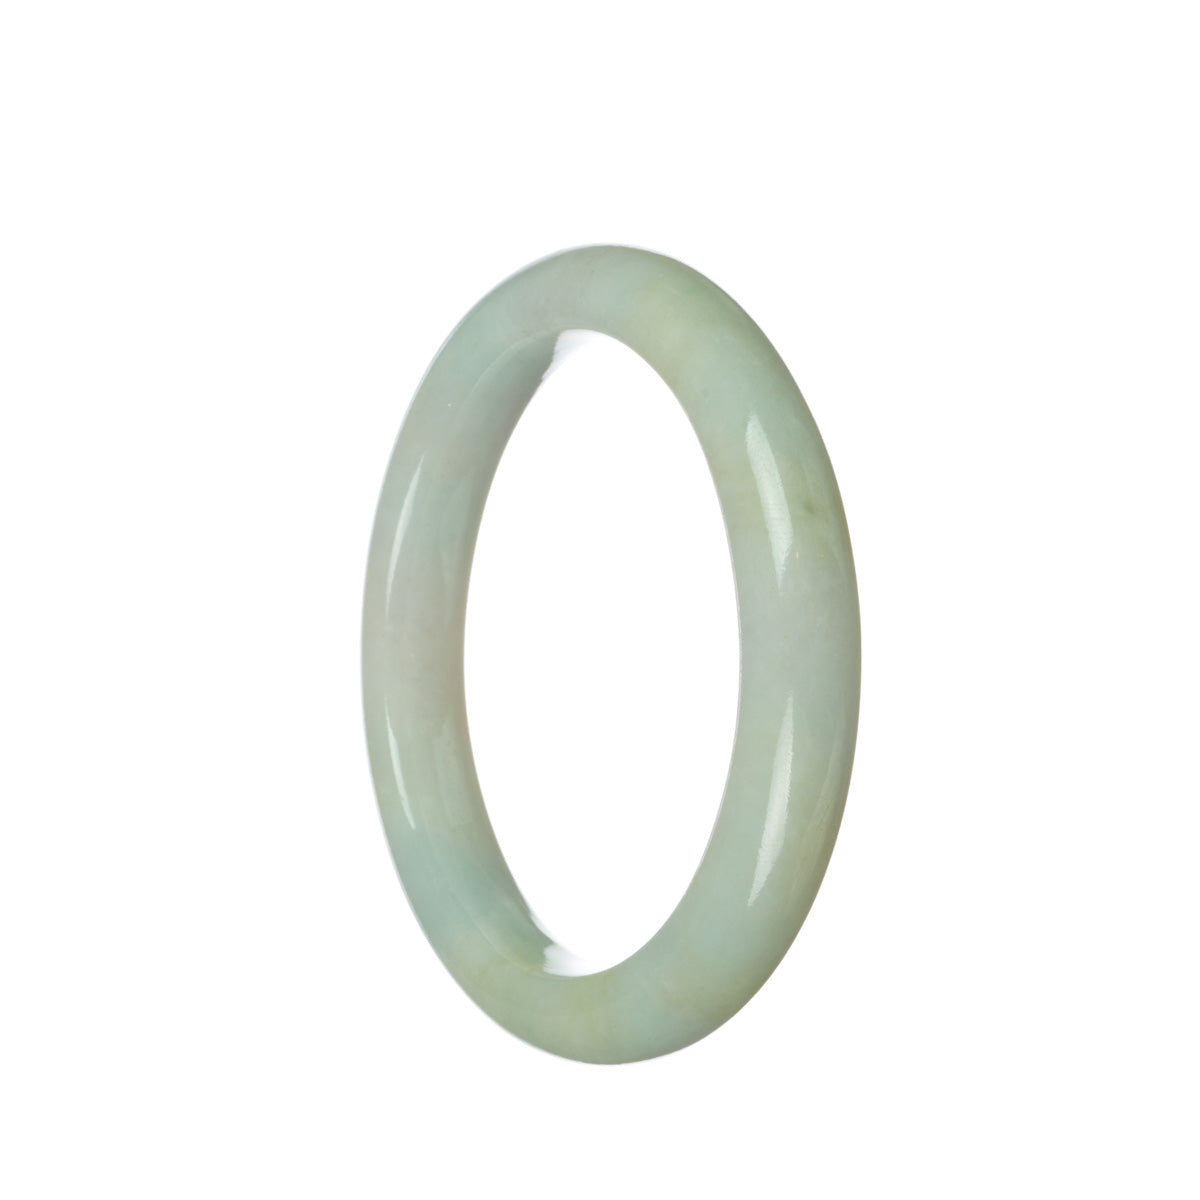 A close-up image of a pale green traditional jade bangle, crafted from genuine Grade A jade. The bangle has a half moon shape and measures 59mm in diameter. It is a high-quality piece from the MAYS™ brand.